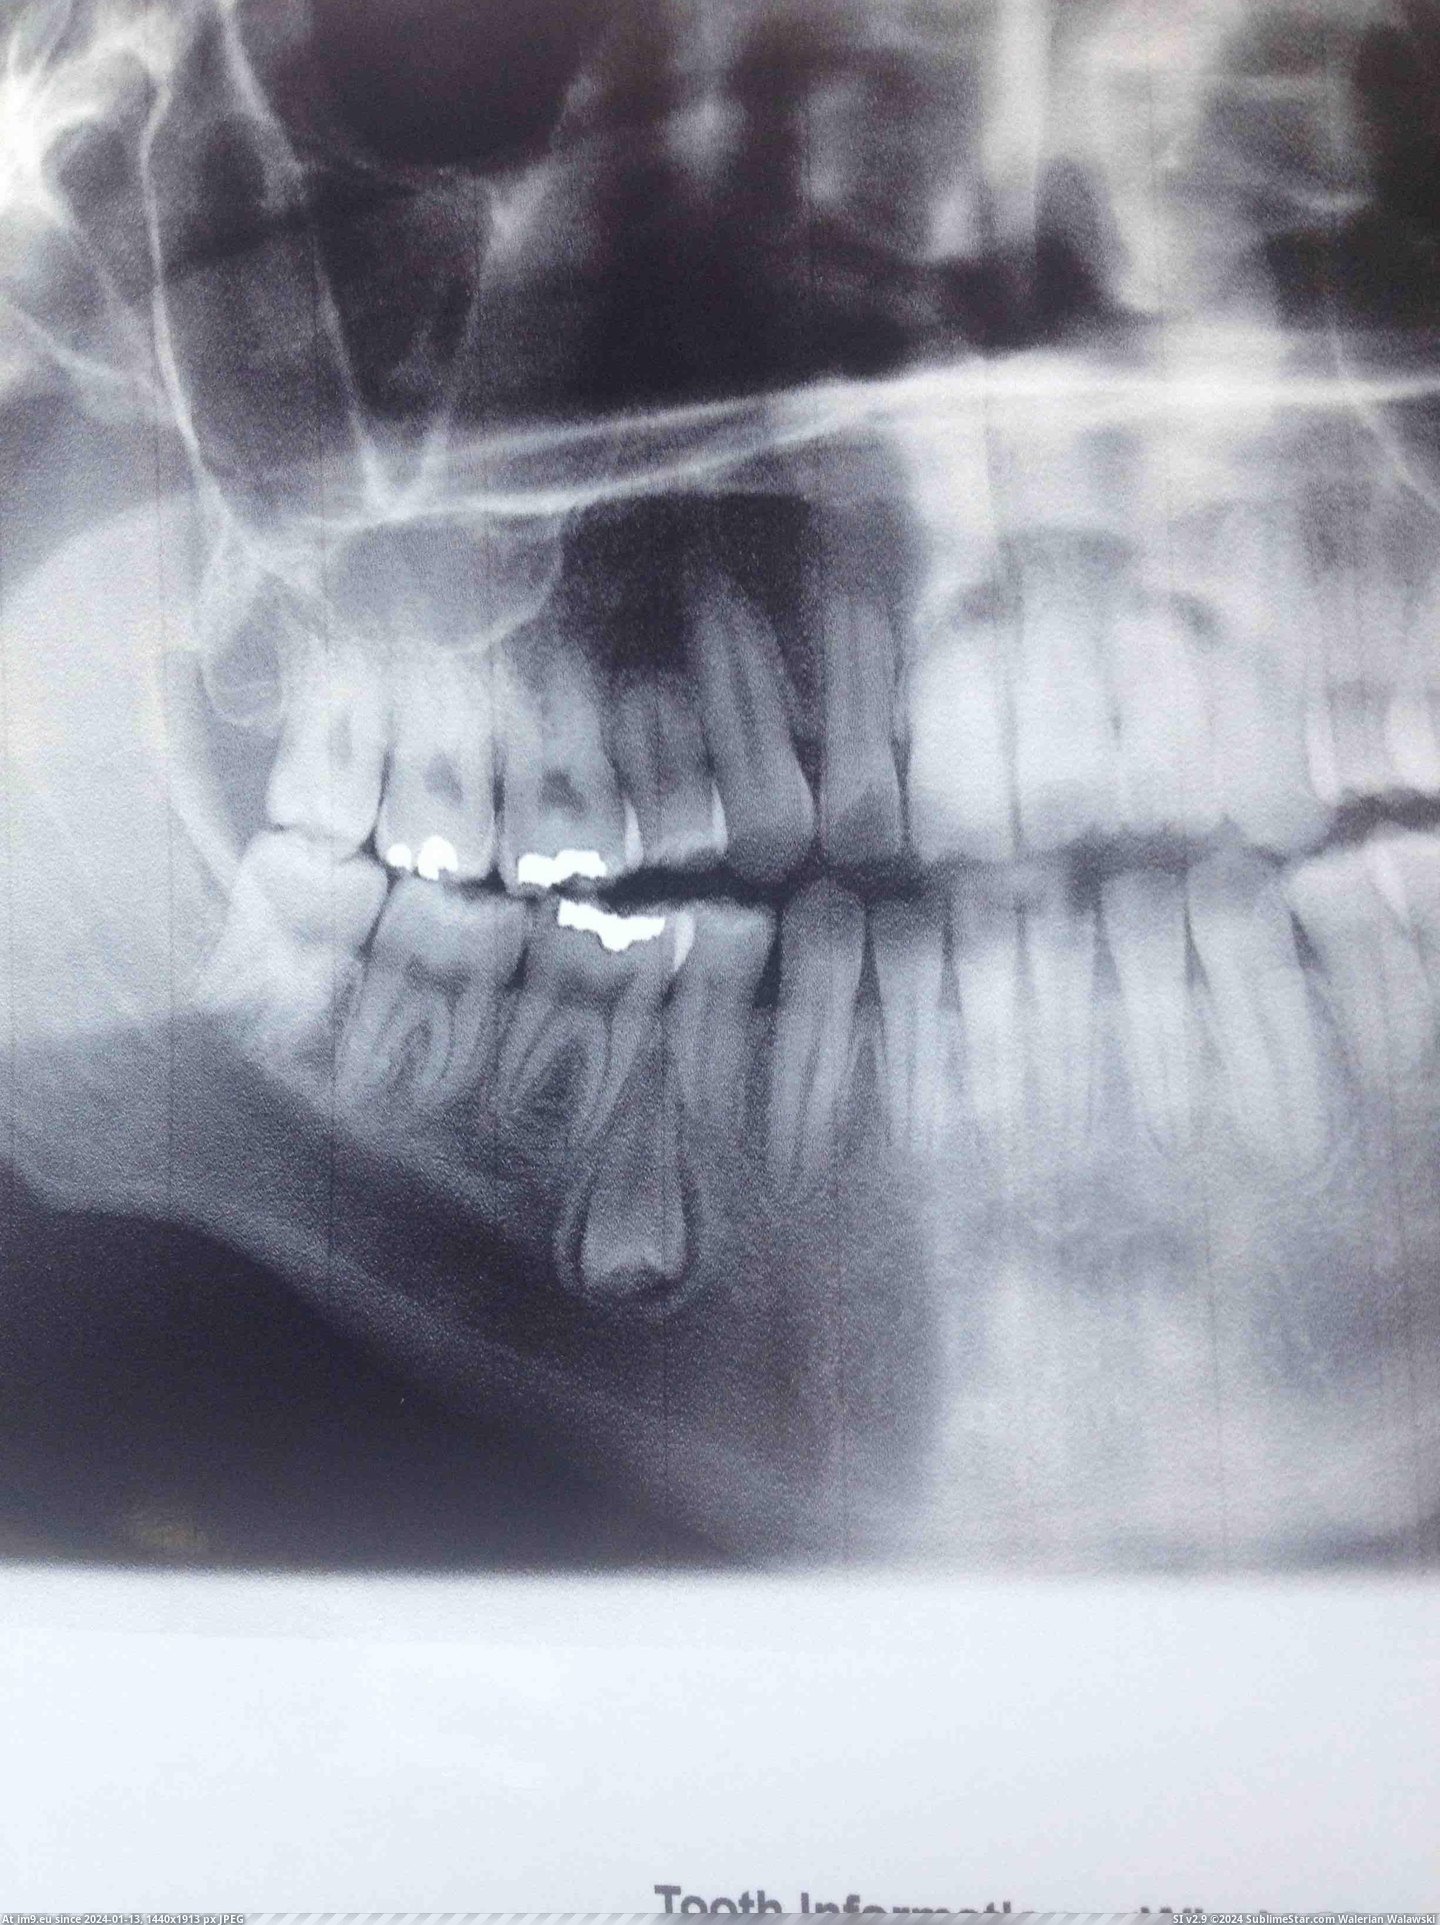 #Wtf #Growing #Tooth #Dentist #Gums #Upside #Discovered [Wtf] Went to the Dentist yesterday, they discovered a tooth growing upside down in my gums. Pic. (Obraz z album My r/WTF favs))